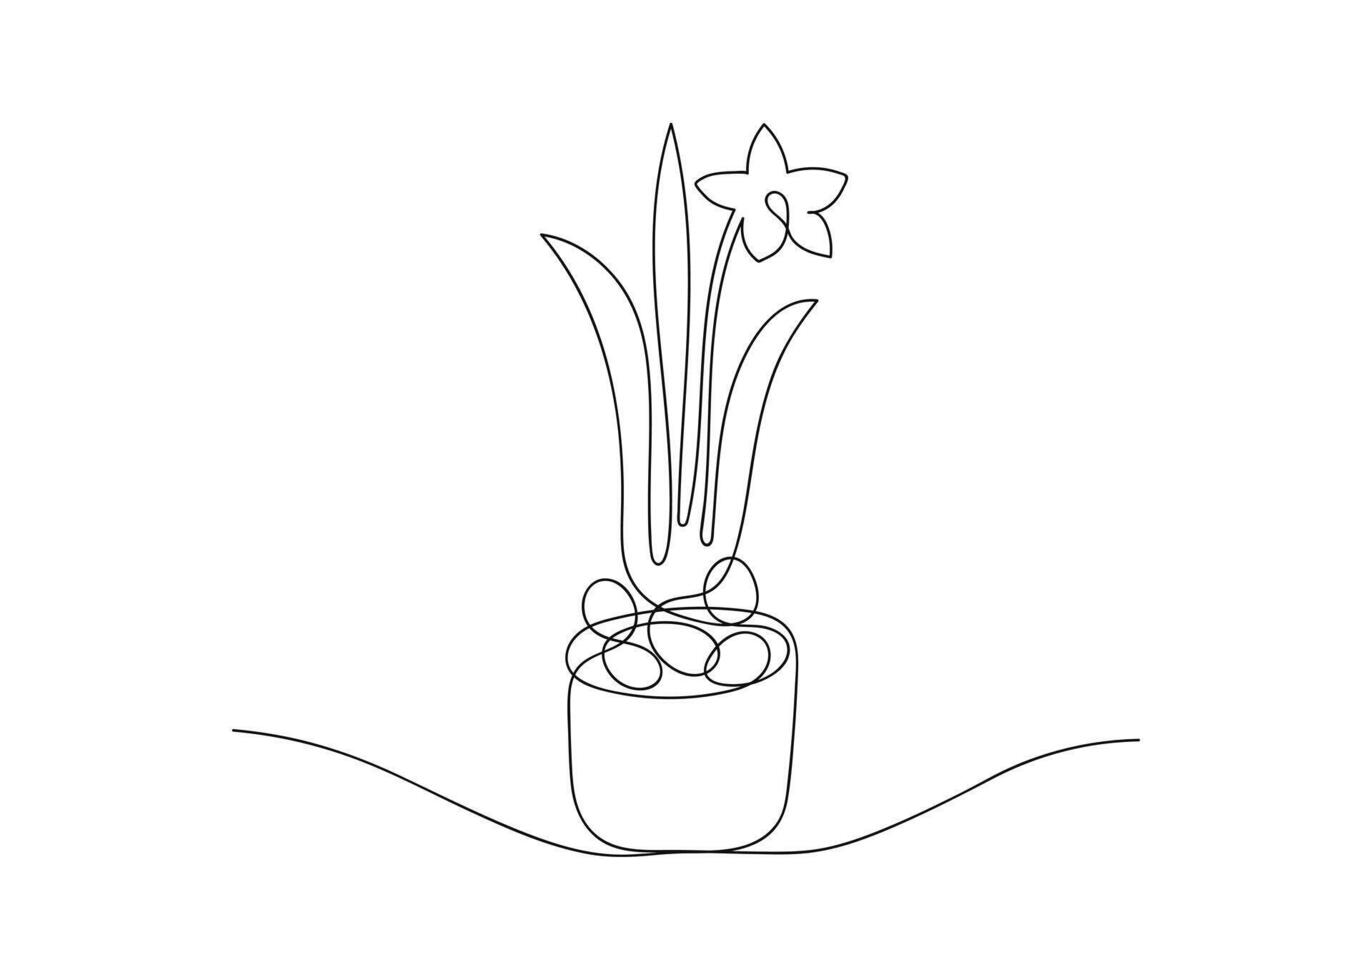 Outline Easter eggs and blooming narcissus Flower in pot. Festive continuous one line drawing of Egg Hunter concept. Hand drawn vector illustration in modern minimal style for greeting card, poster.